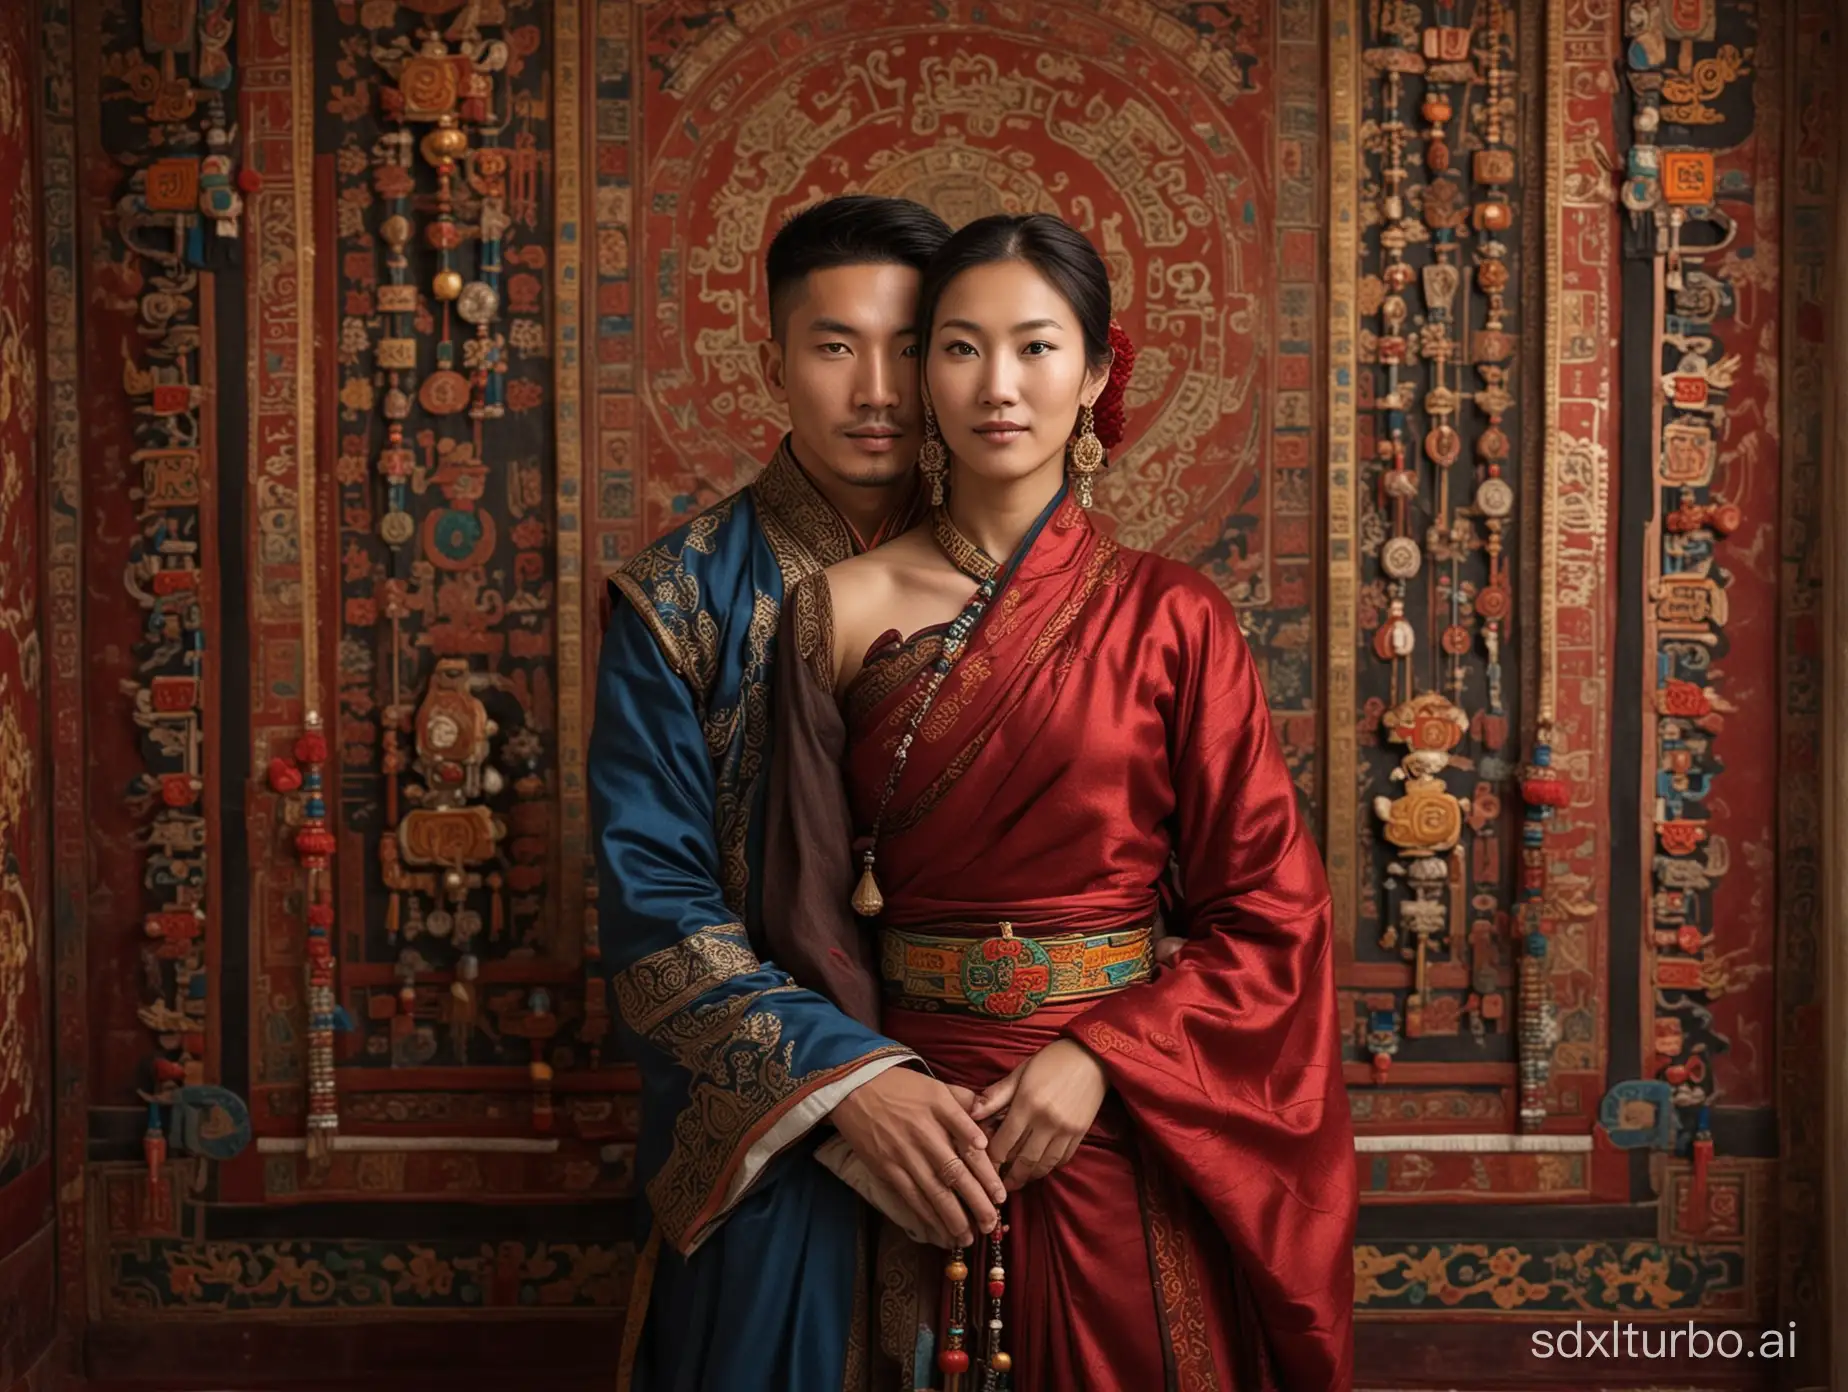 Tibetanstyle-Couple-Portrait-Intimate-Embrace-amid-Traditional-Decorations